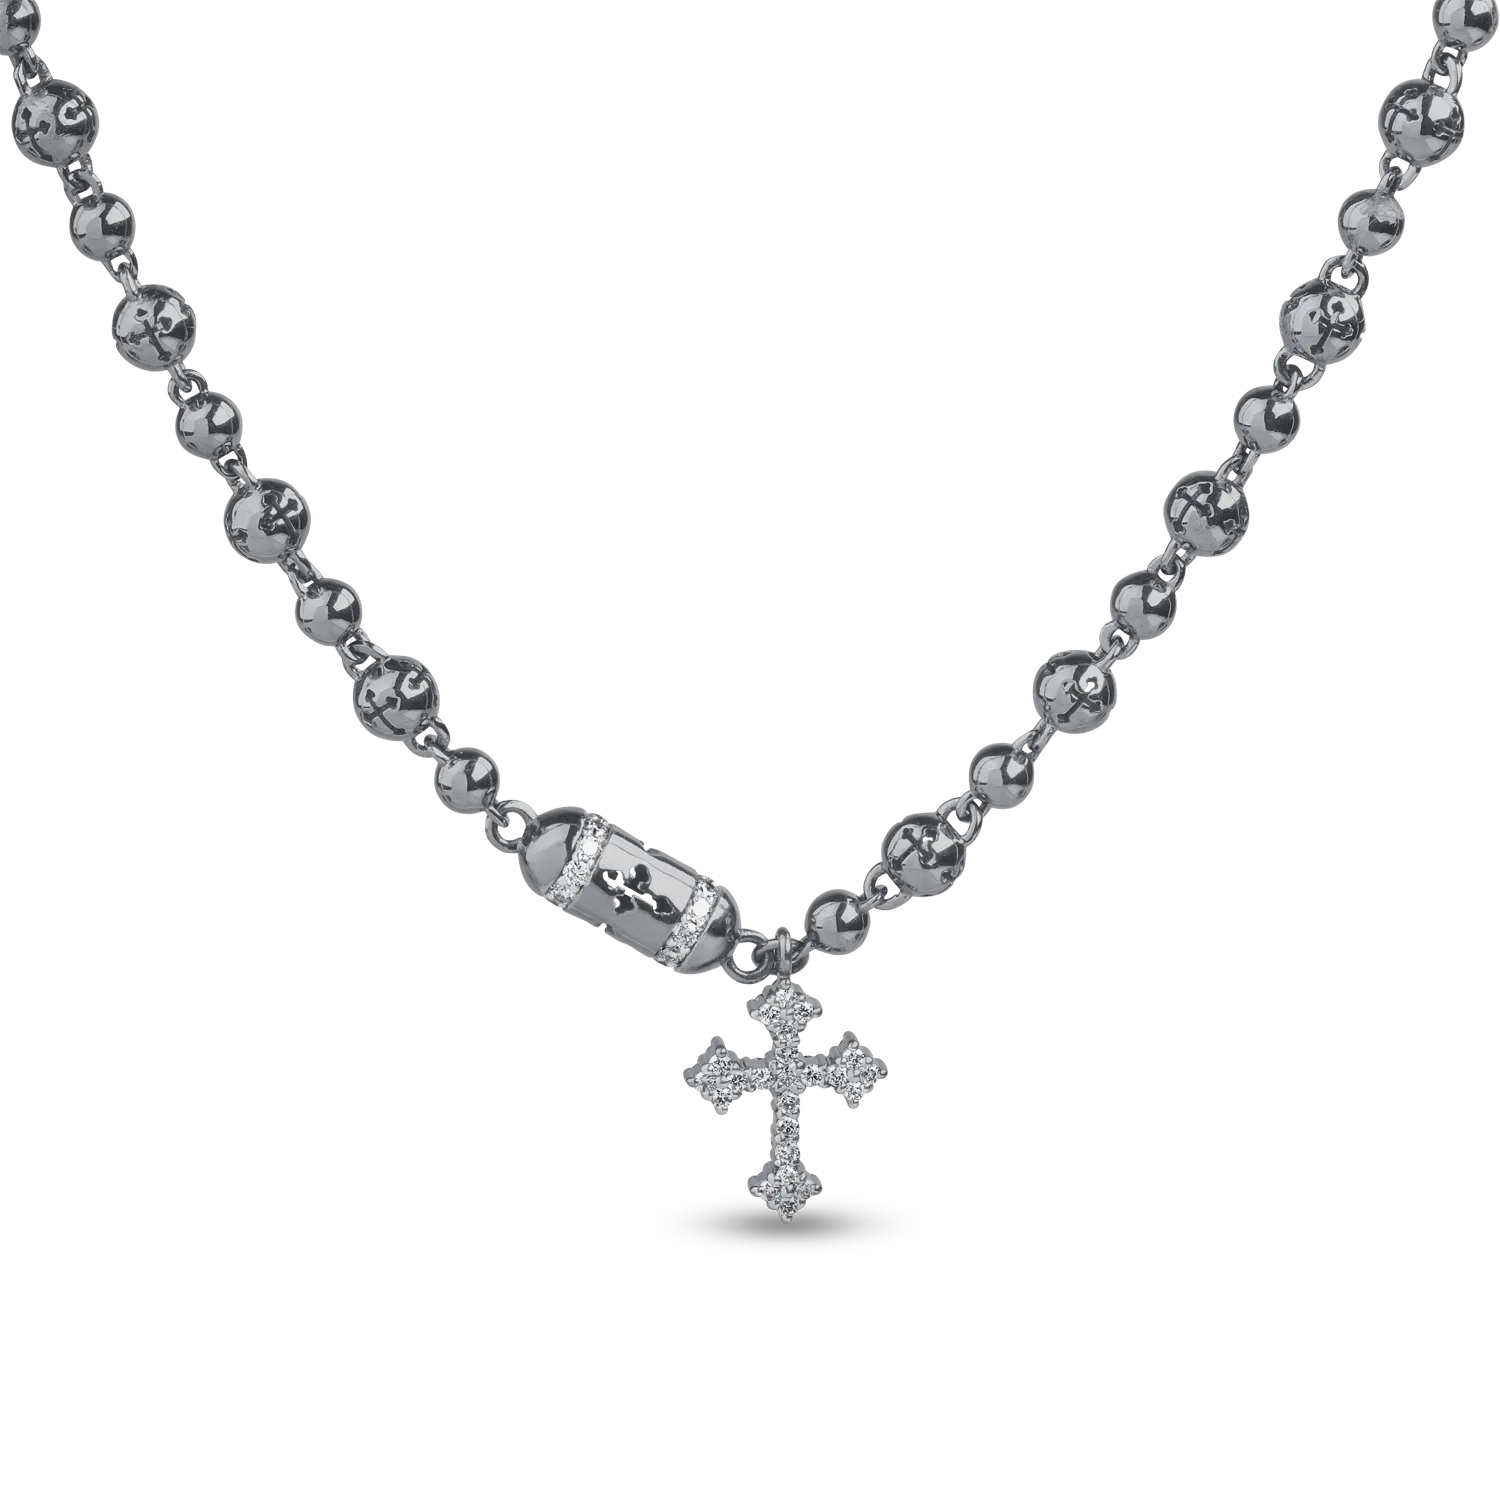 18K black gold cross pendant necklace with 0.35ct clear diamonds and 0.17ct black diamonds